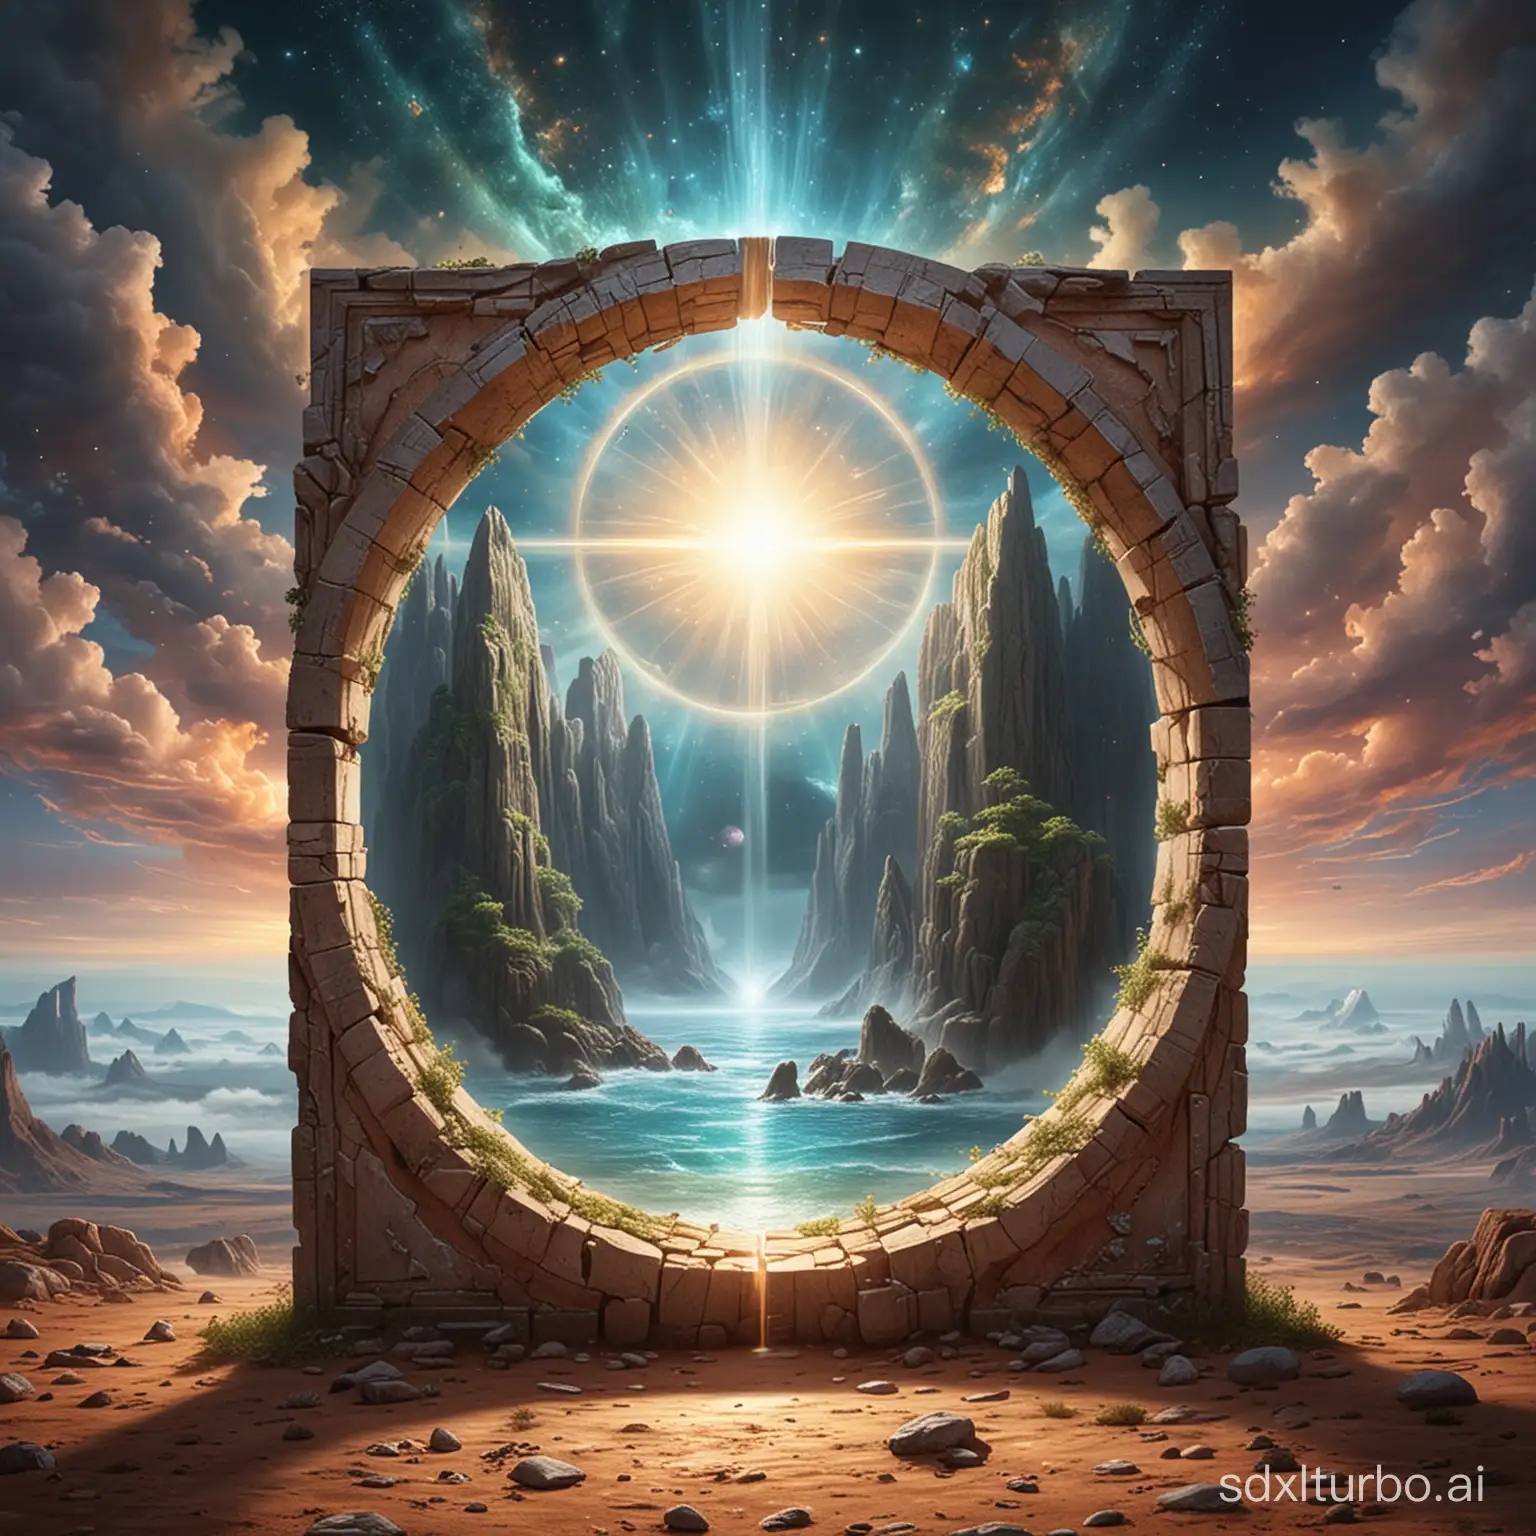 Imaginary portal representing the earthly world with the spiritual world. The materialization of the transition allows the existence of life